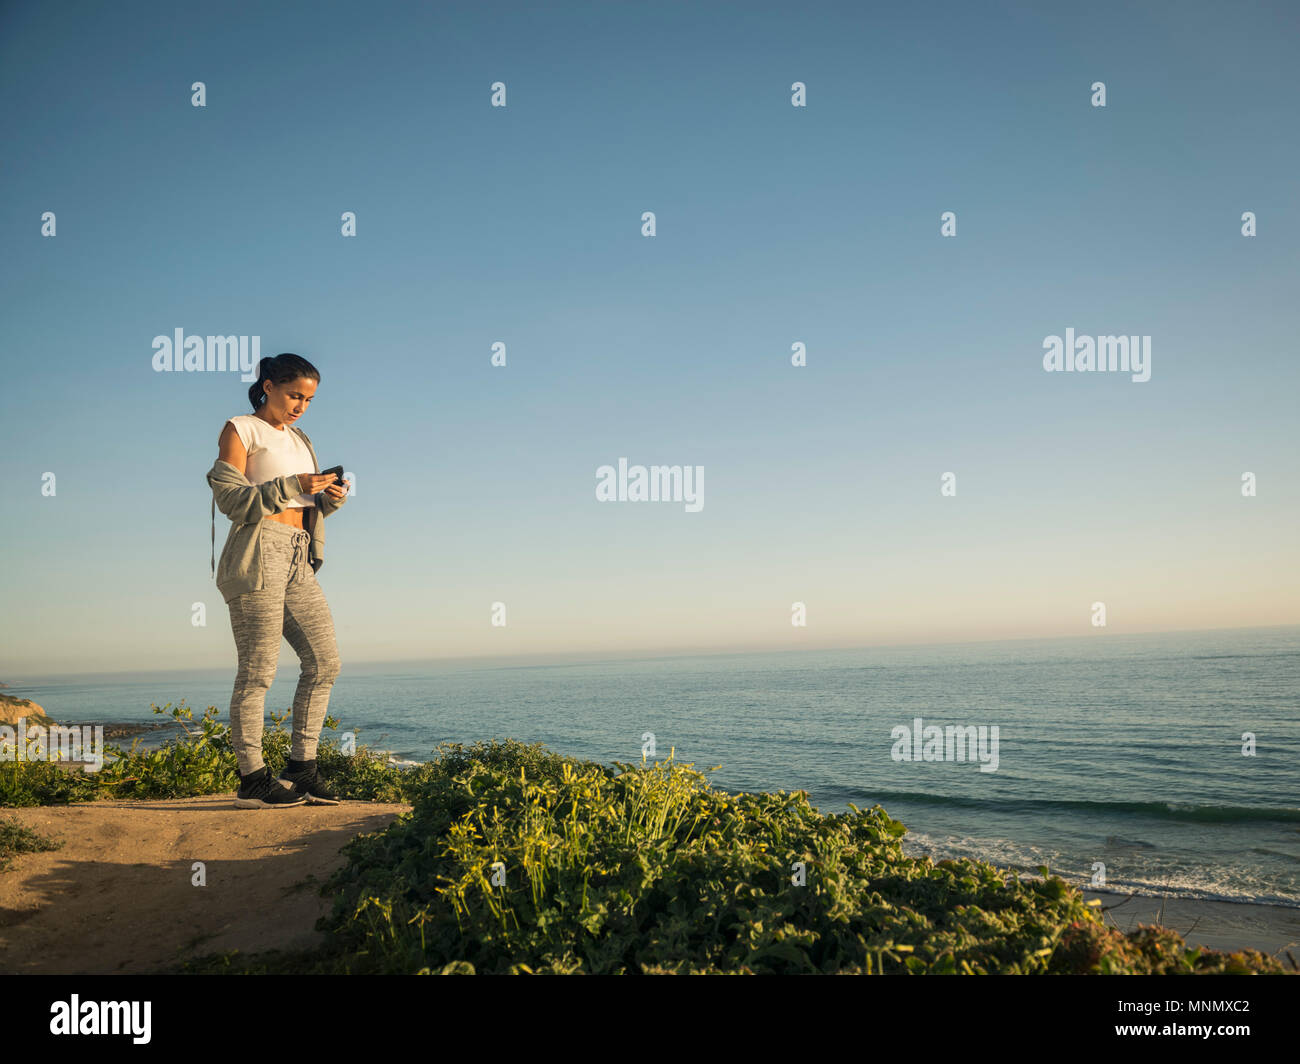 USA, California, Newport Beach, Woman standing on cliff and looking at phone Stock Photo